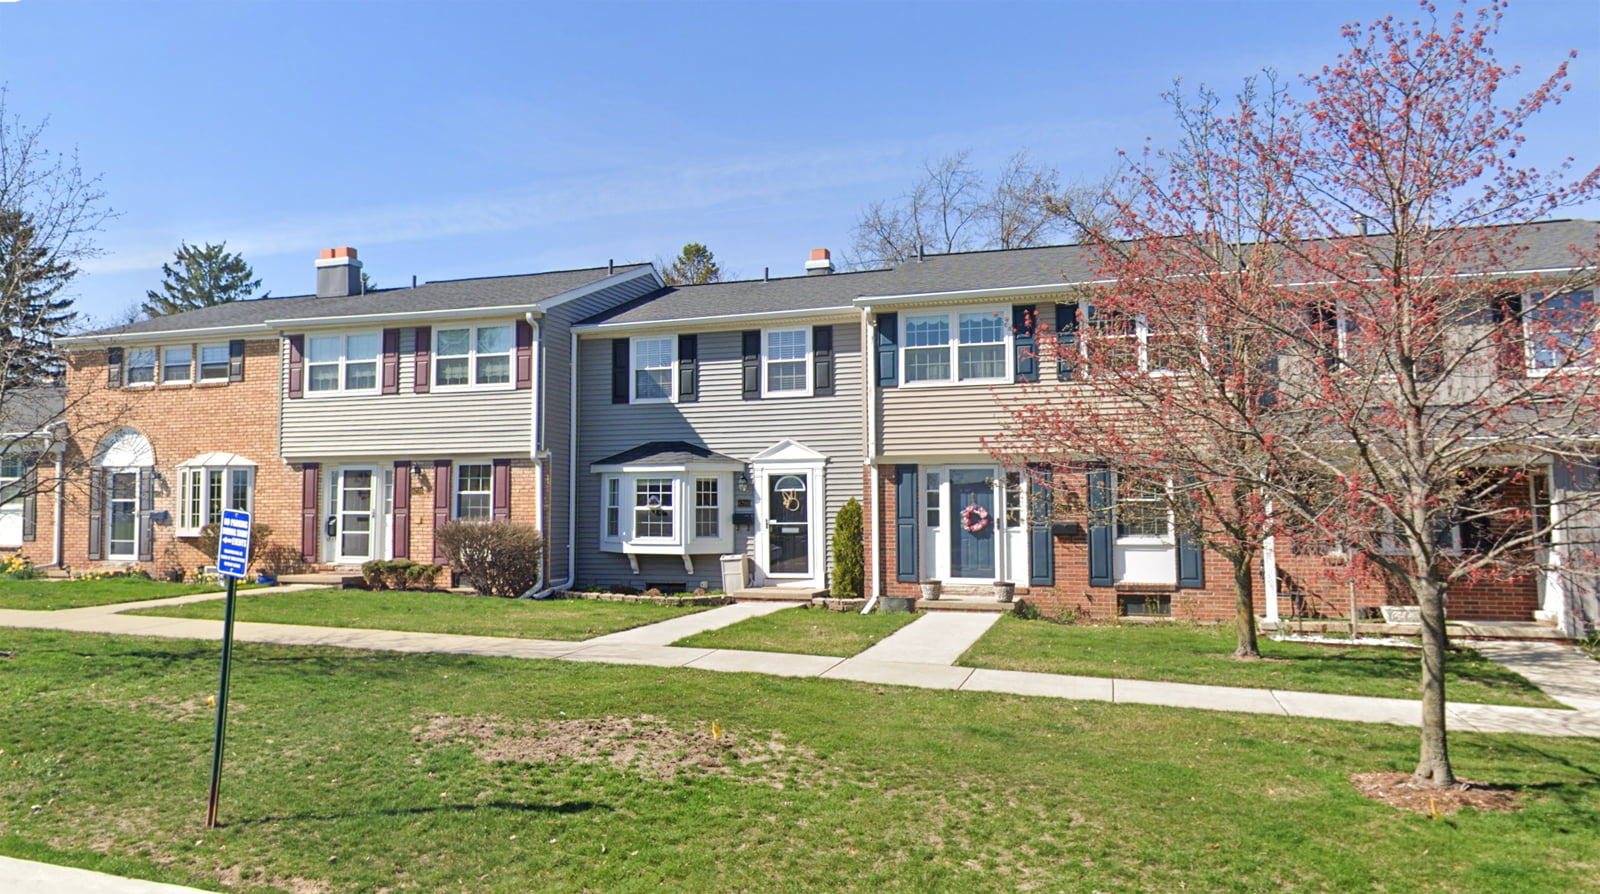 Exterior view of Highland Lakes Condo subdivision showing a row of two-story townhouses with brick facades and varying siding colors, manicured lawns, and a clear blue sky in the background